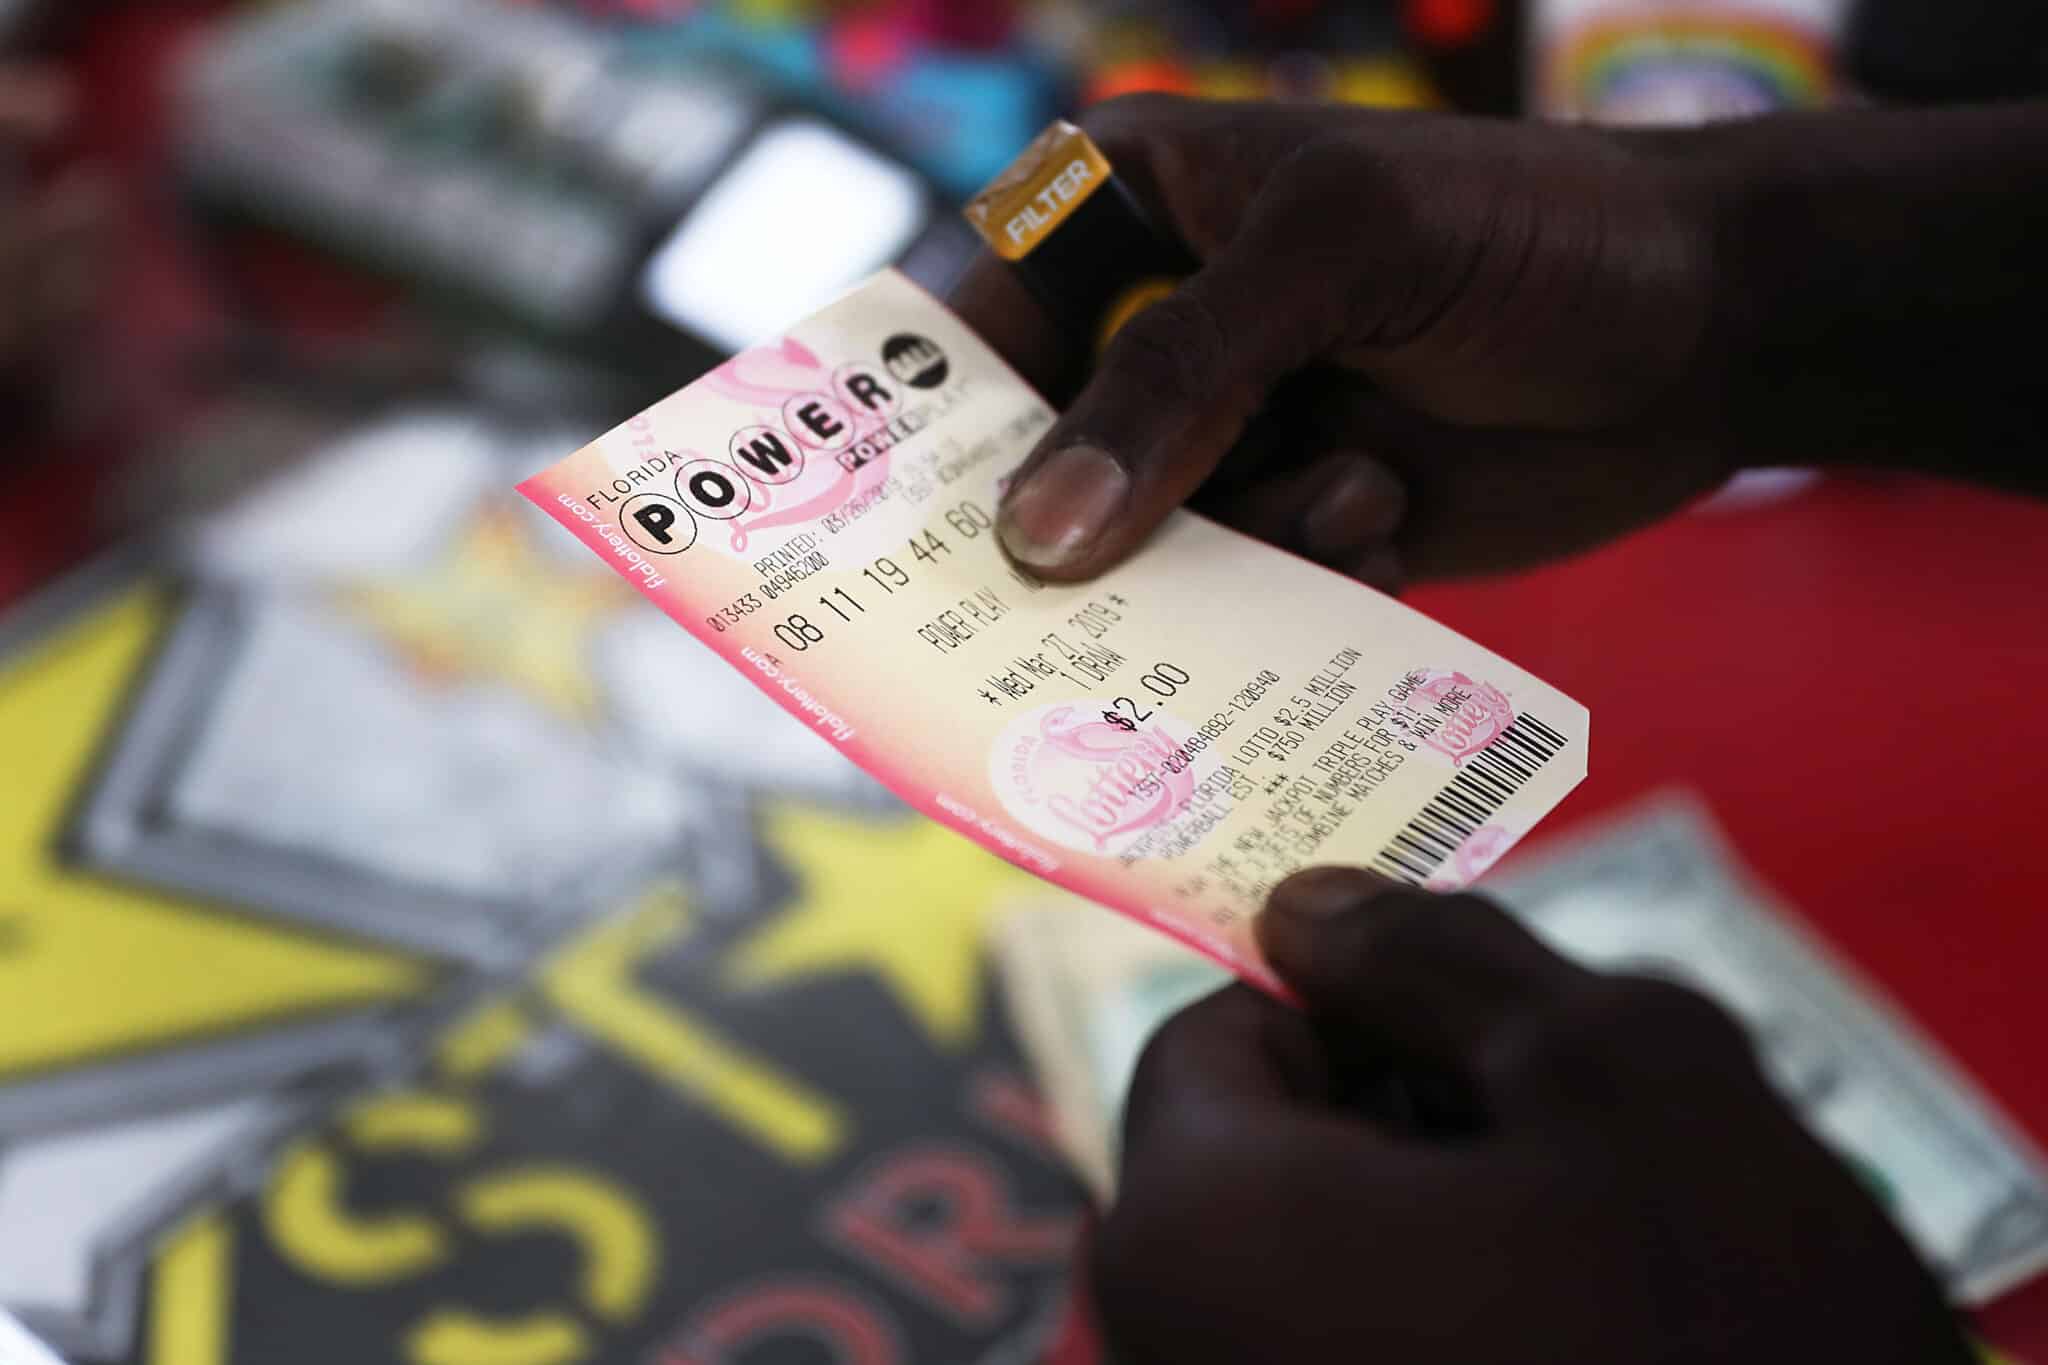 BOYNTON BEACH, FLORIDA - MARCH 26:  George Hollins buys a Powerball ticket at the Shell Gateway store on March 26, 2019 in Boynton Beach, Florida. Wednesday's Powerball drawing will be an approximately $750 million jackpot which would be one of the biggest in US lottery prize history. (Photo by Joe Raedle/Getty Images)